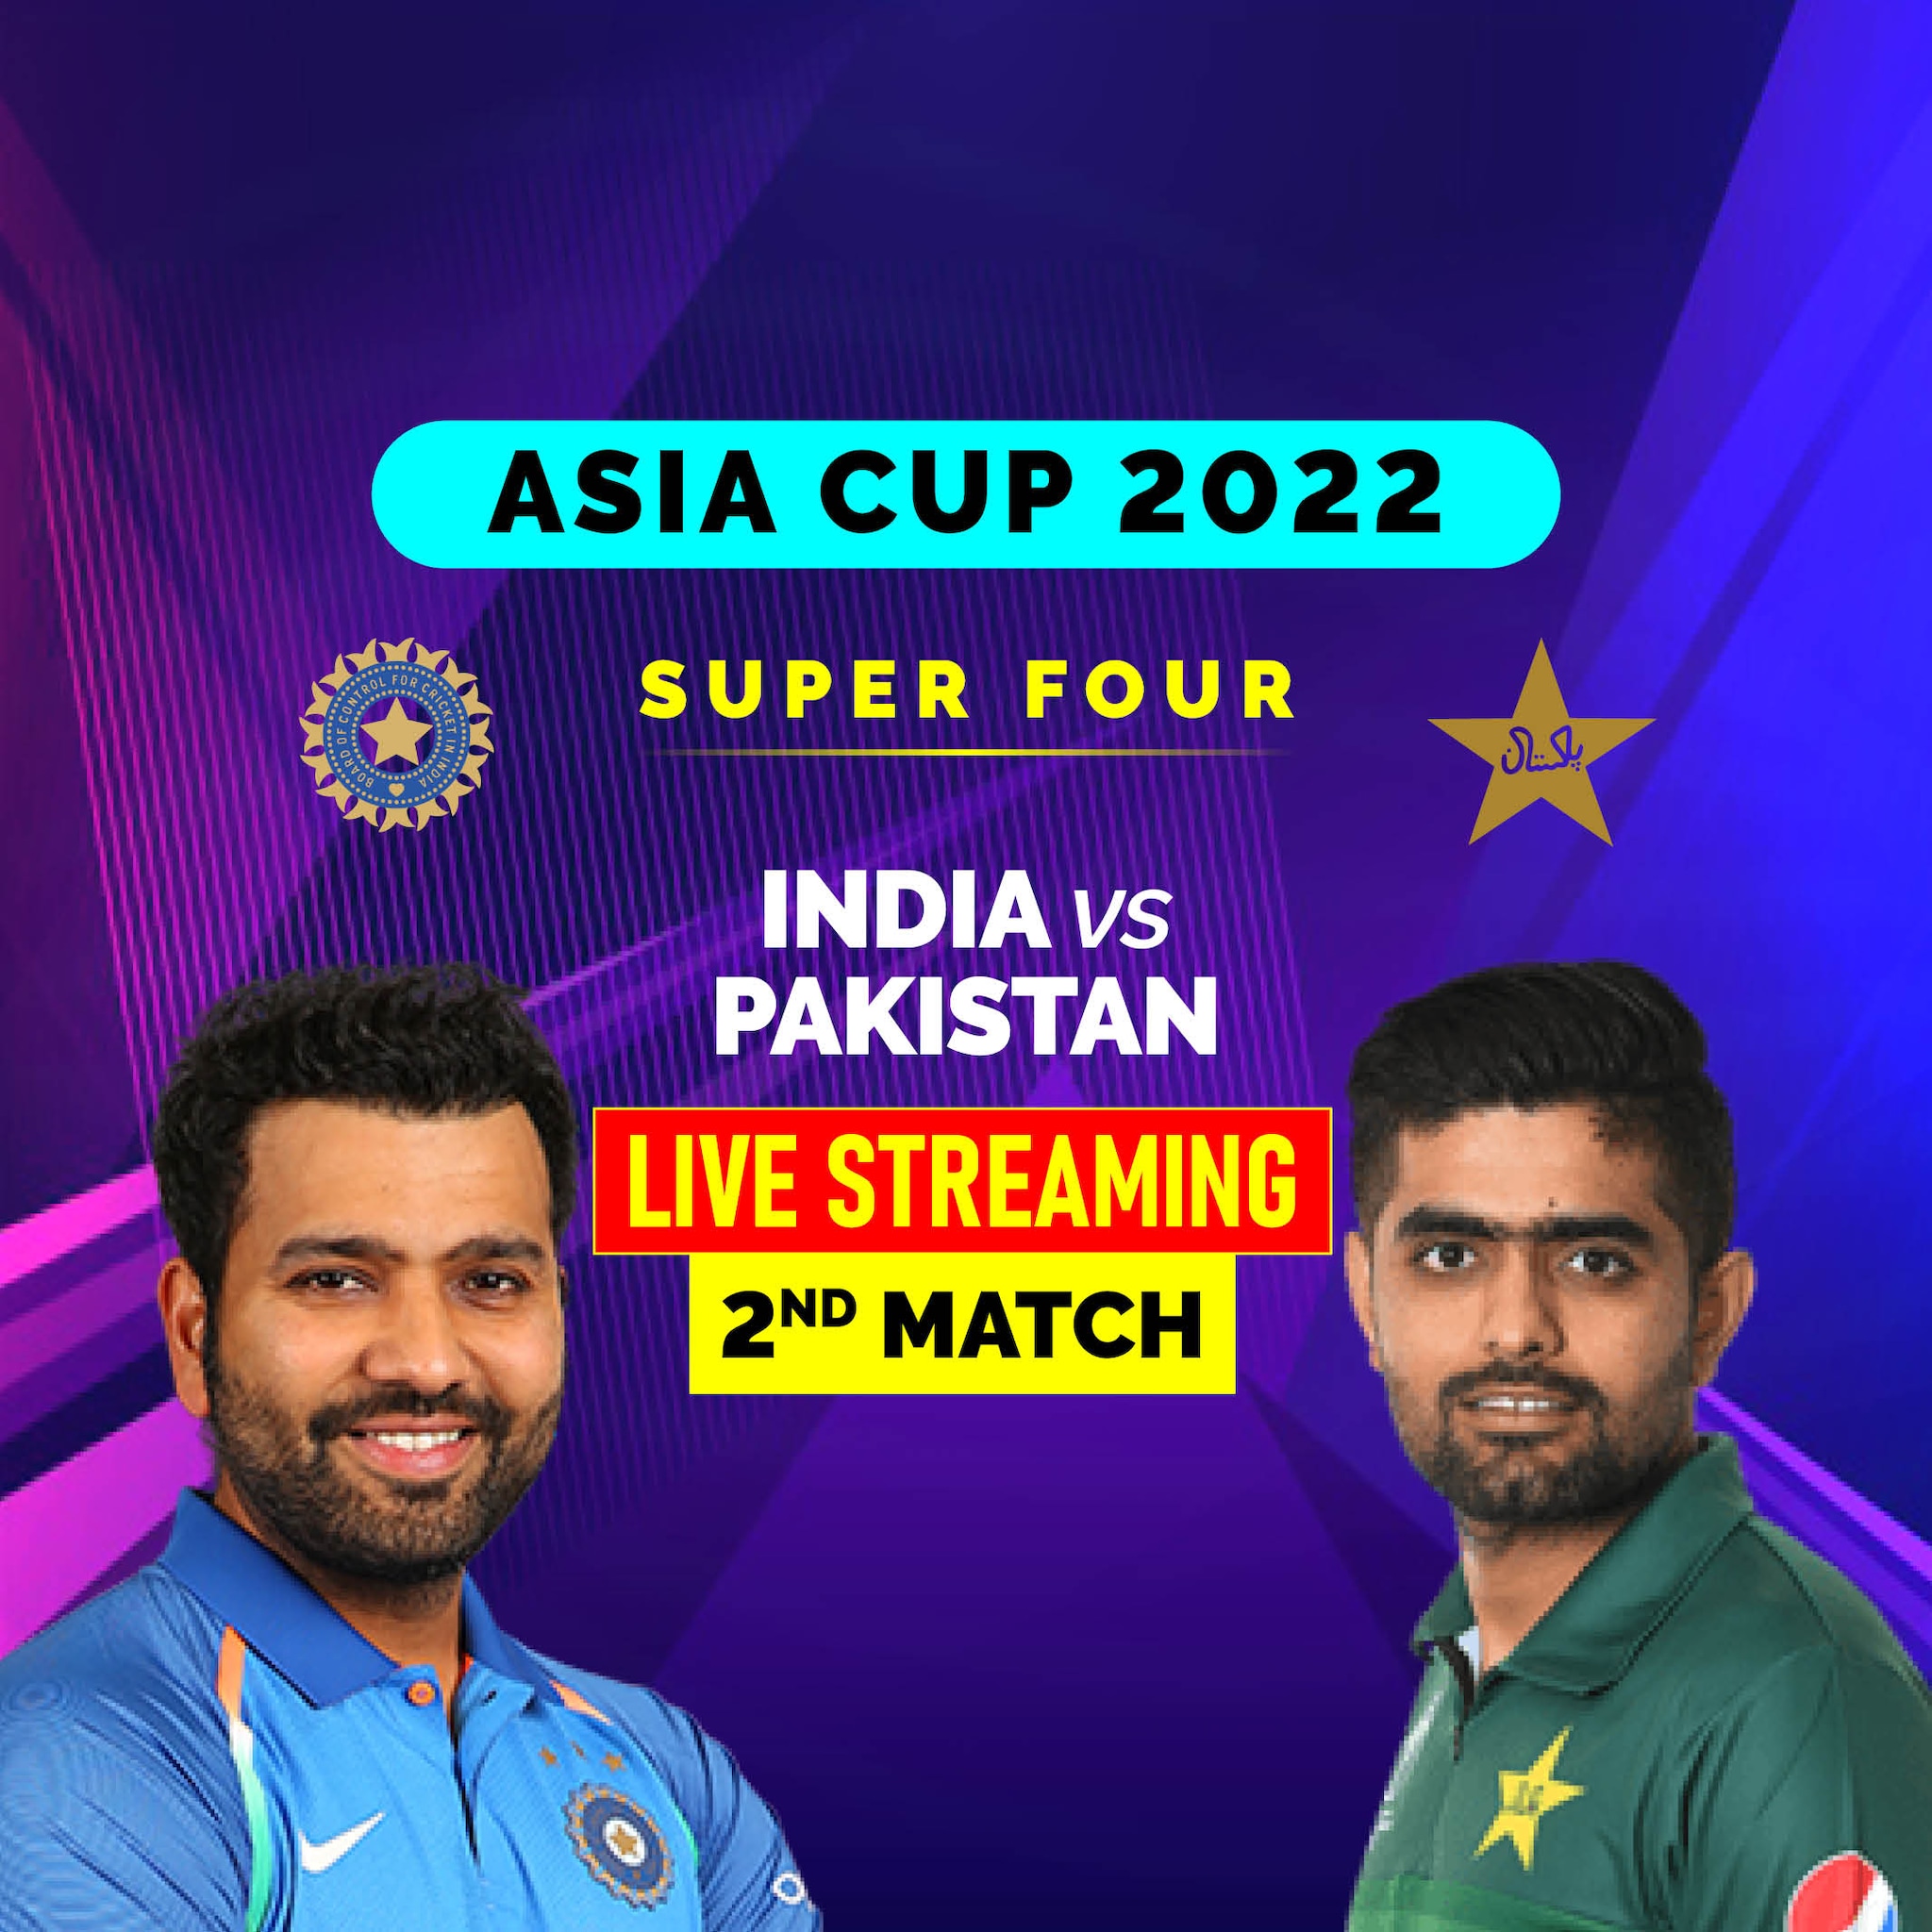 India vs Pakistan Live Cricket Streaming Asia Cup 2022 Super 4 IND vs PAK When and Where to Watch the IND vs PAK Asia Cup 2022 match